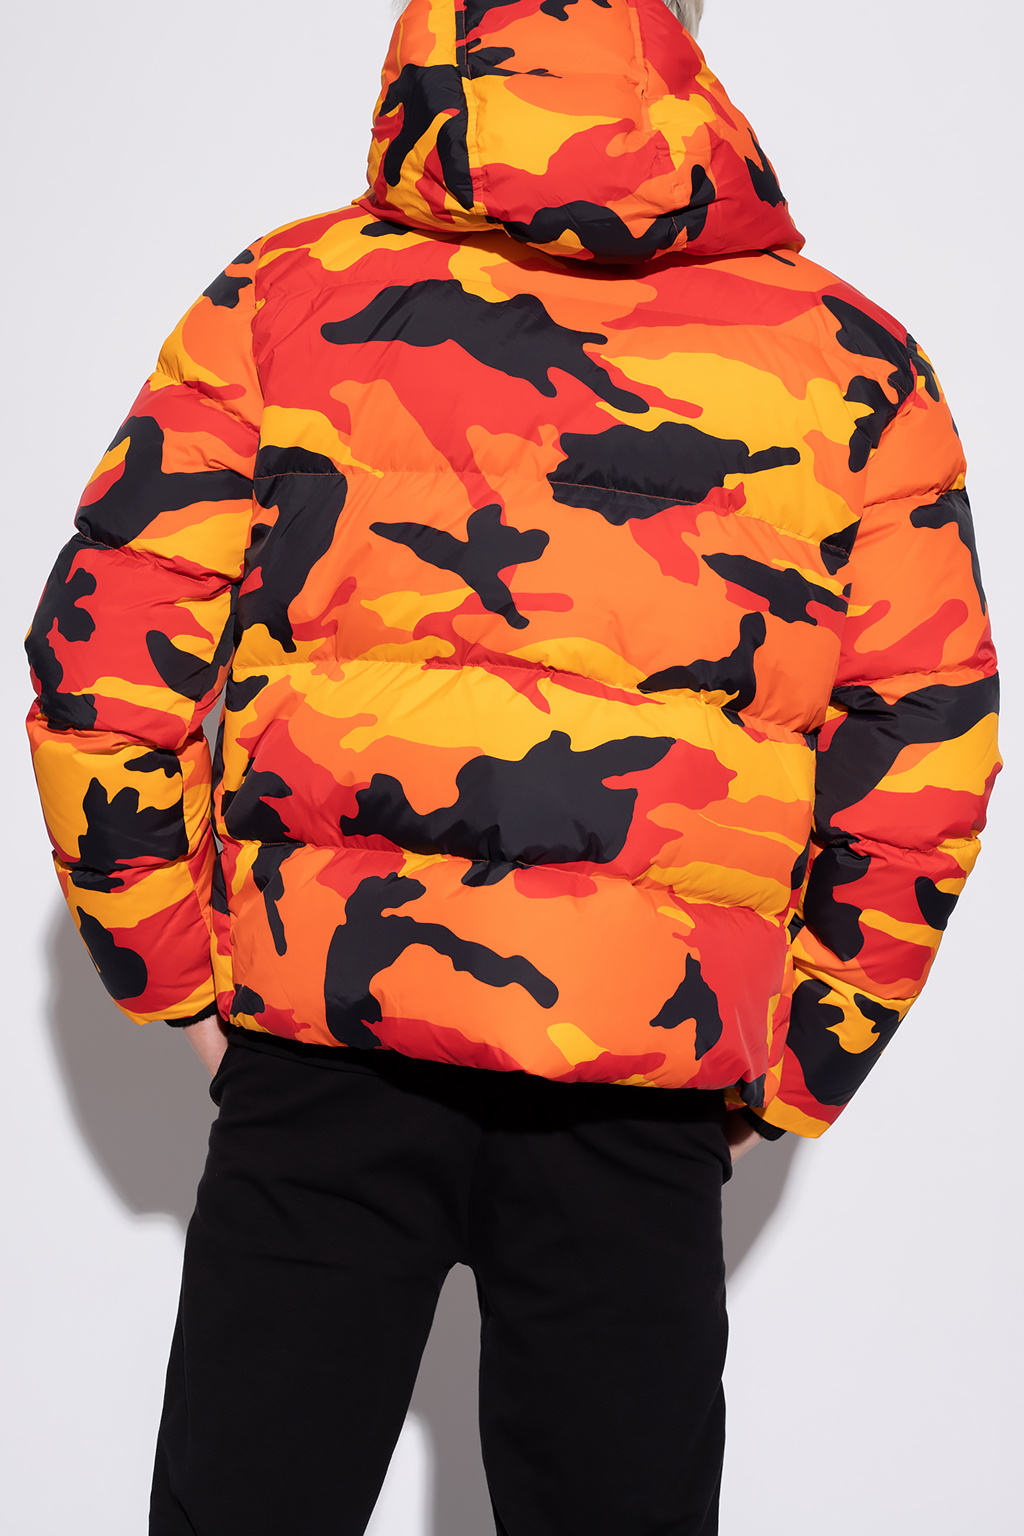 Dsquared2 Camo down jacket